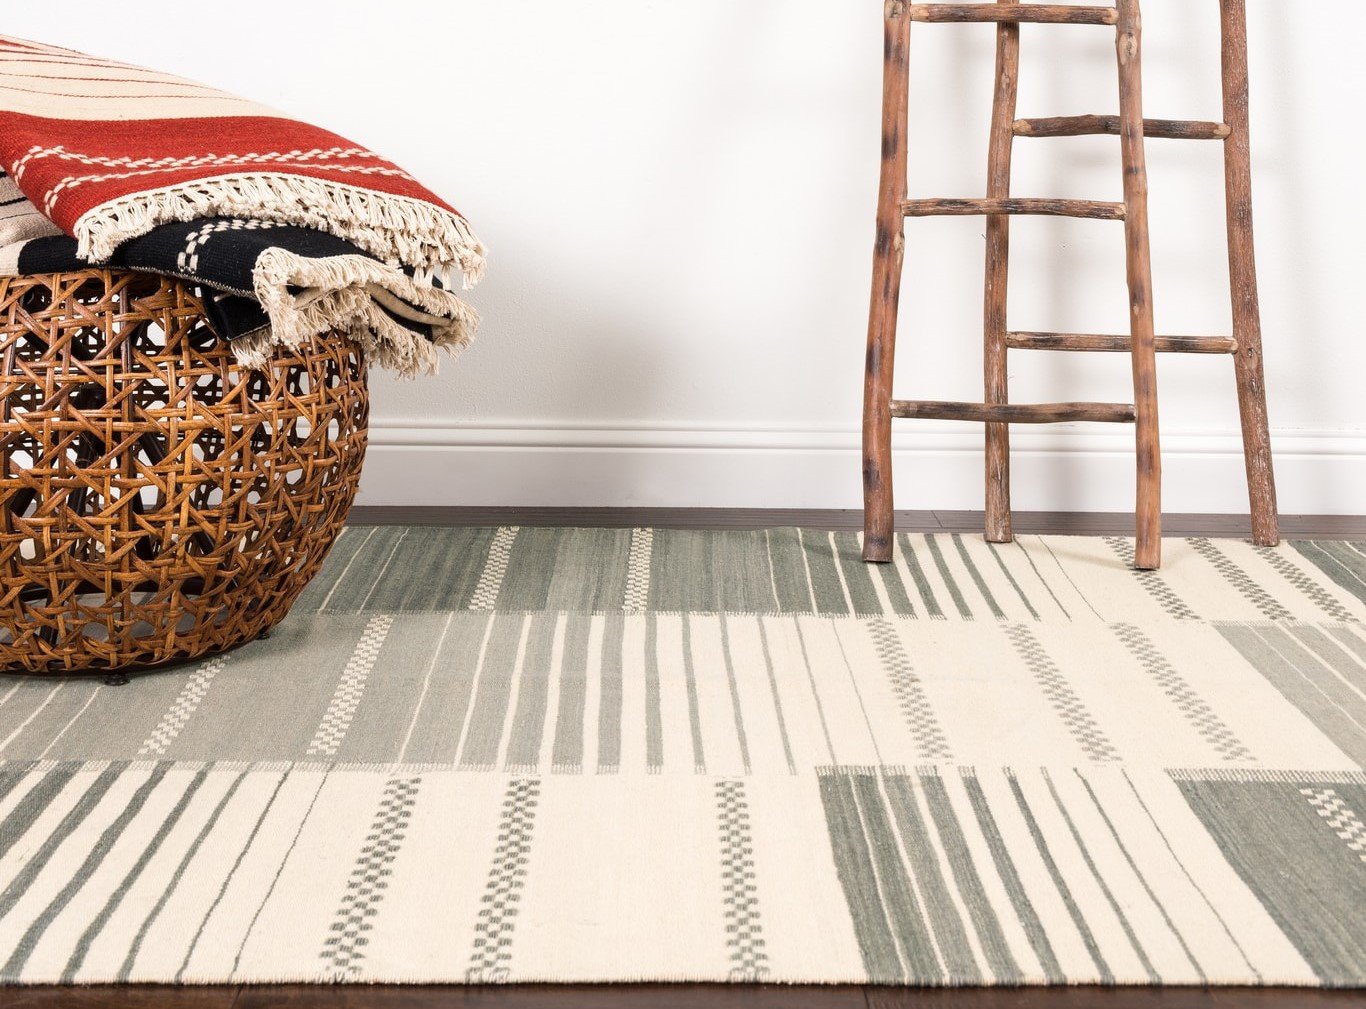 How to Clean Bathroom Rugs to Remove Stinky Odors